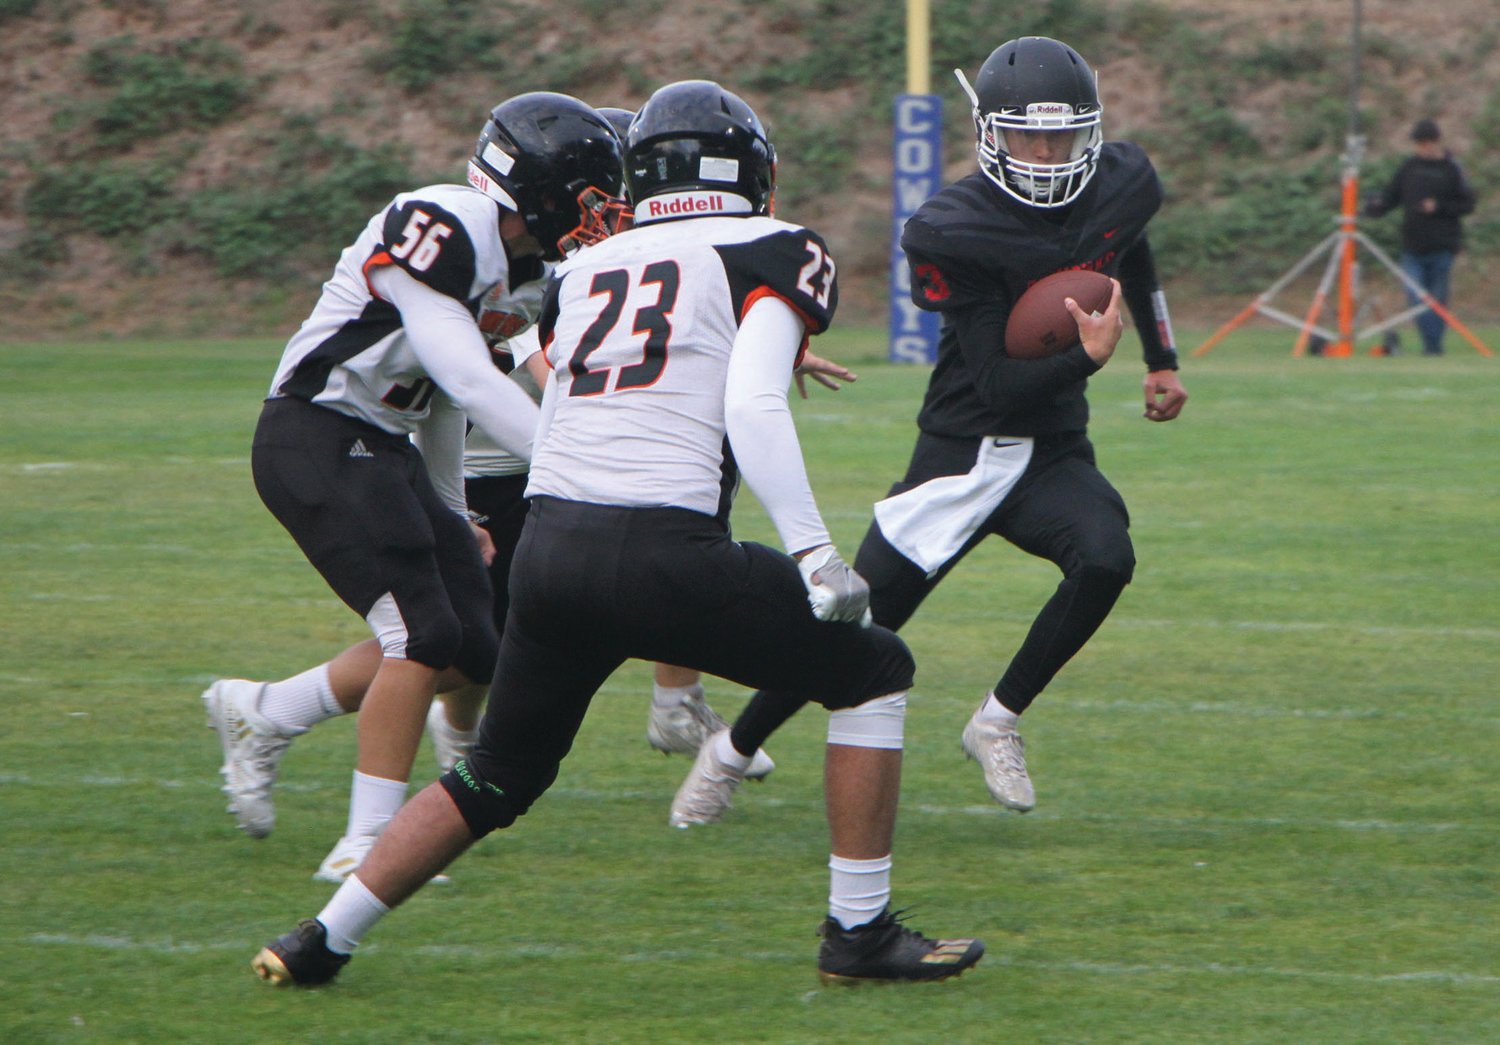 Rivals quarterback Cash Holmes evades defenders as he runs to the sideline for a first down. The Port Townsend High School sophomore scored a 10-yard touchdown run in the first quarter of the game.